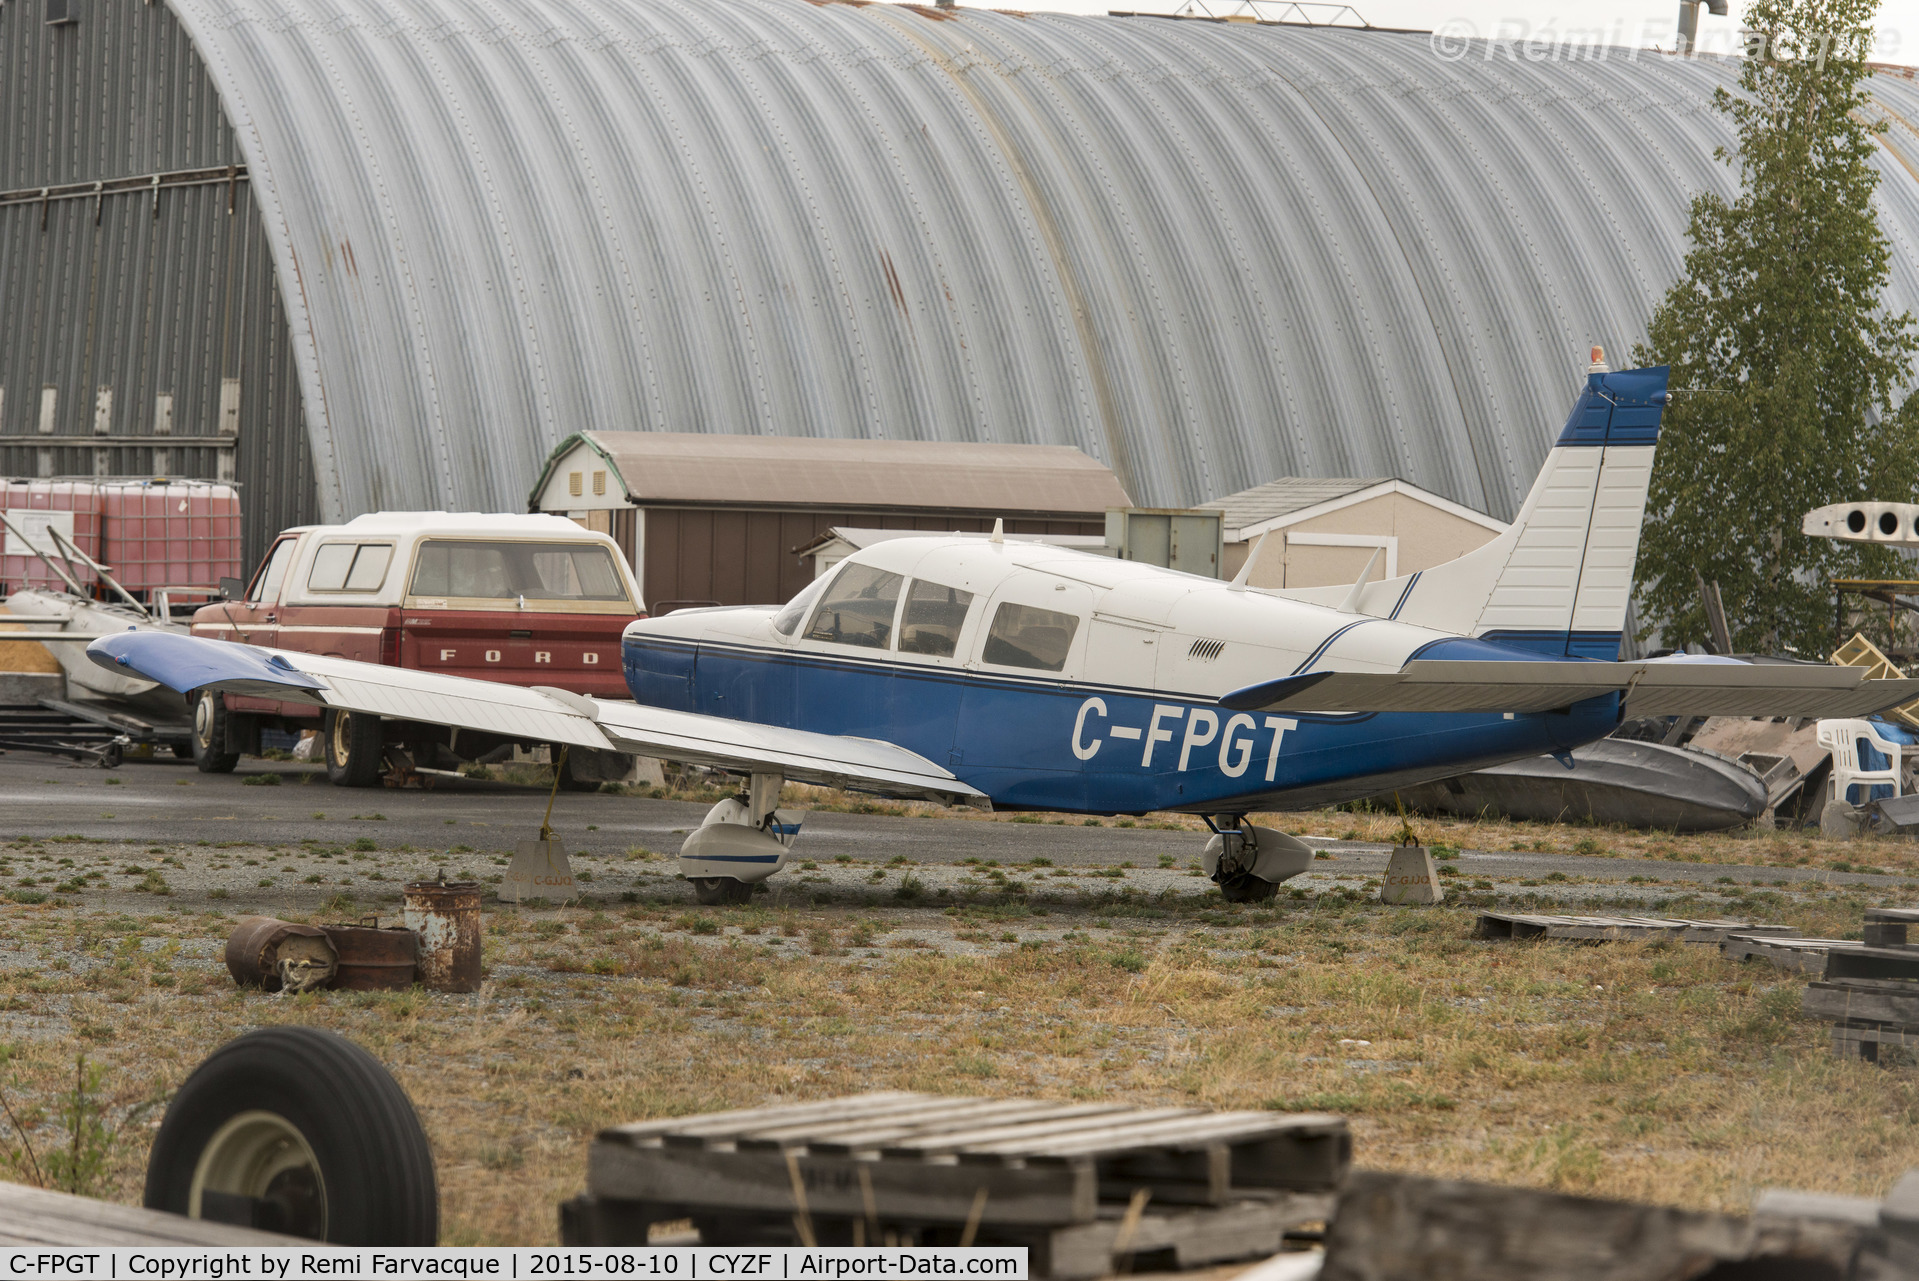 C-FPGT, 1973 Piper PA-32-300 Cherokee Six Cherokee Six C/N 32-7340140, In the wreckers section at the airport.